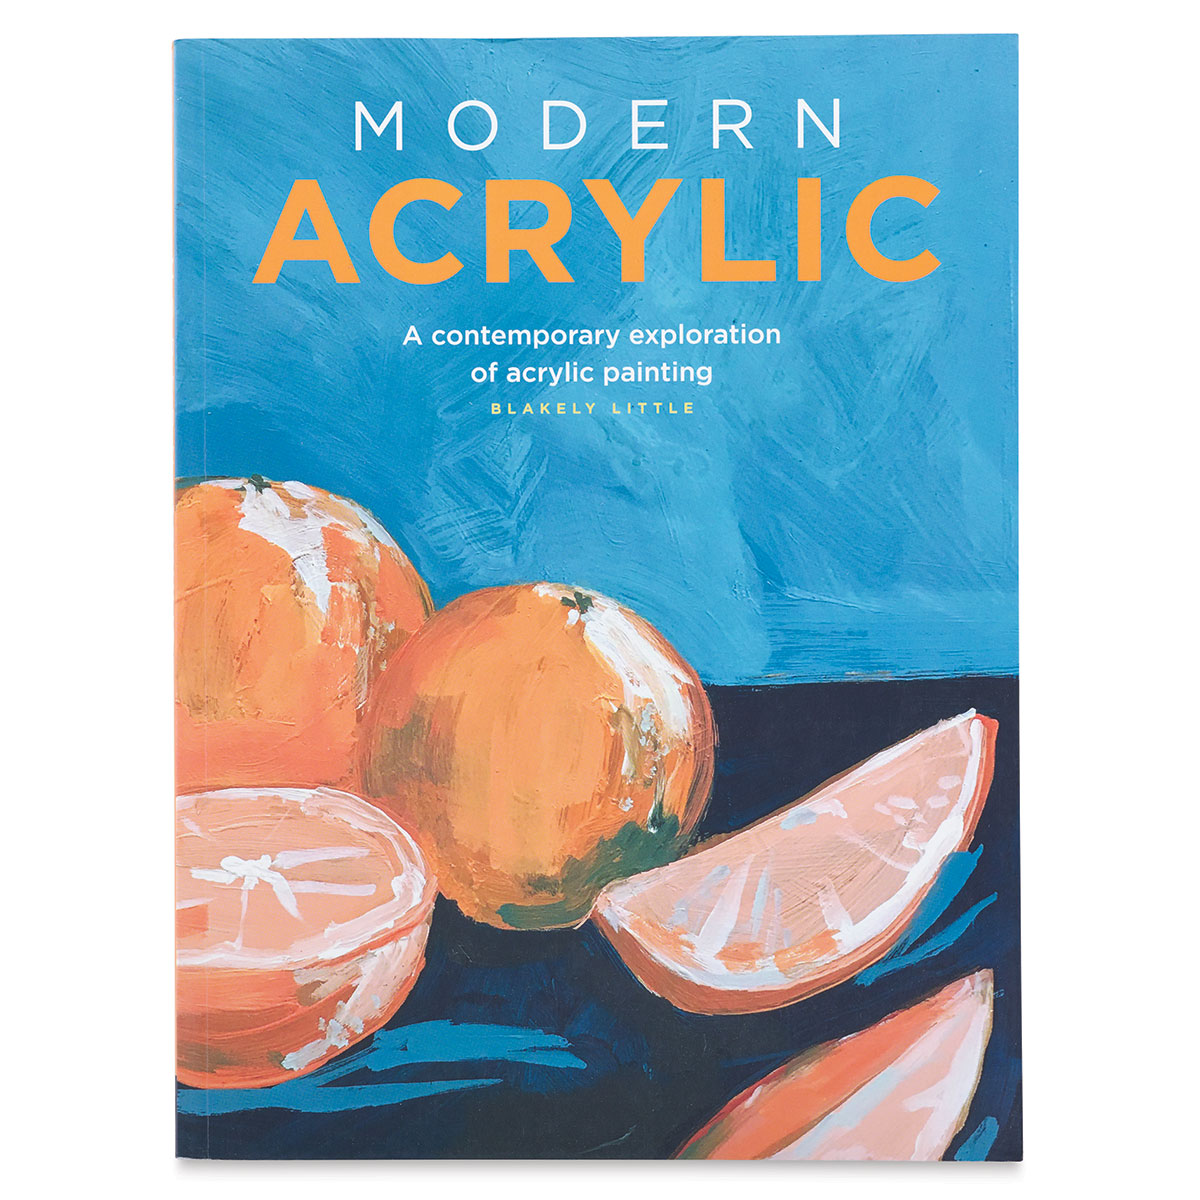 Modern Acrylic: A Contemporary Exploration of Acrylic Painting [Book]